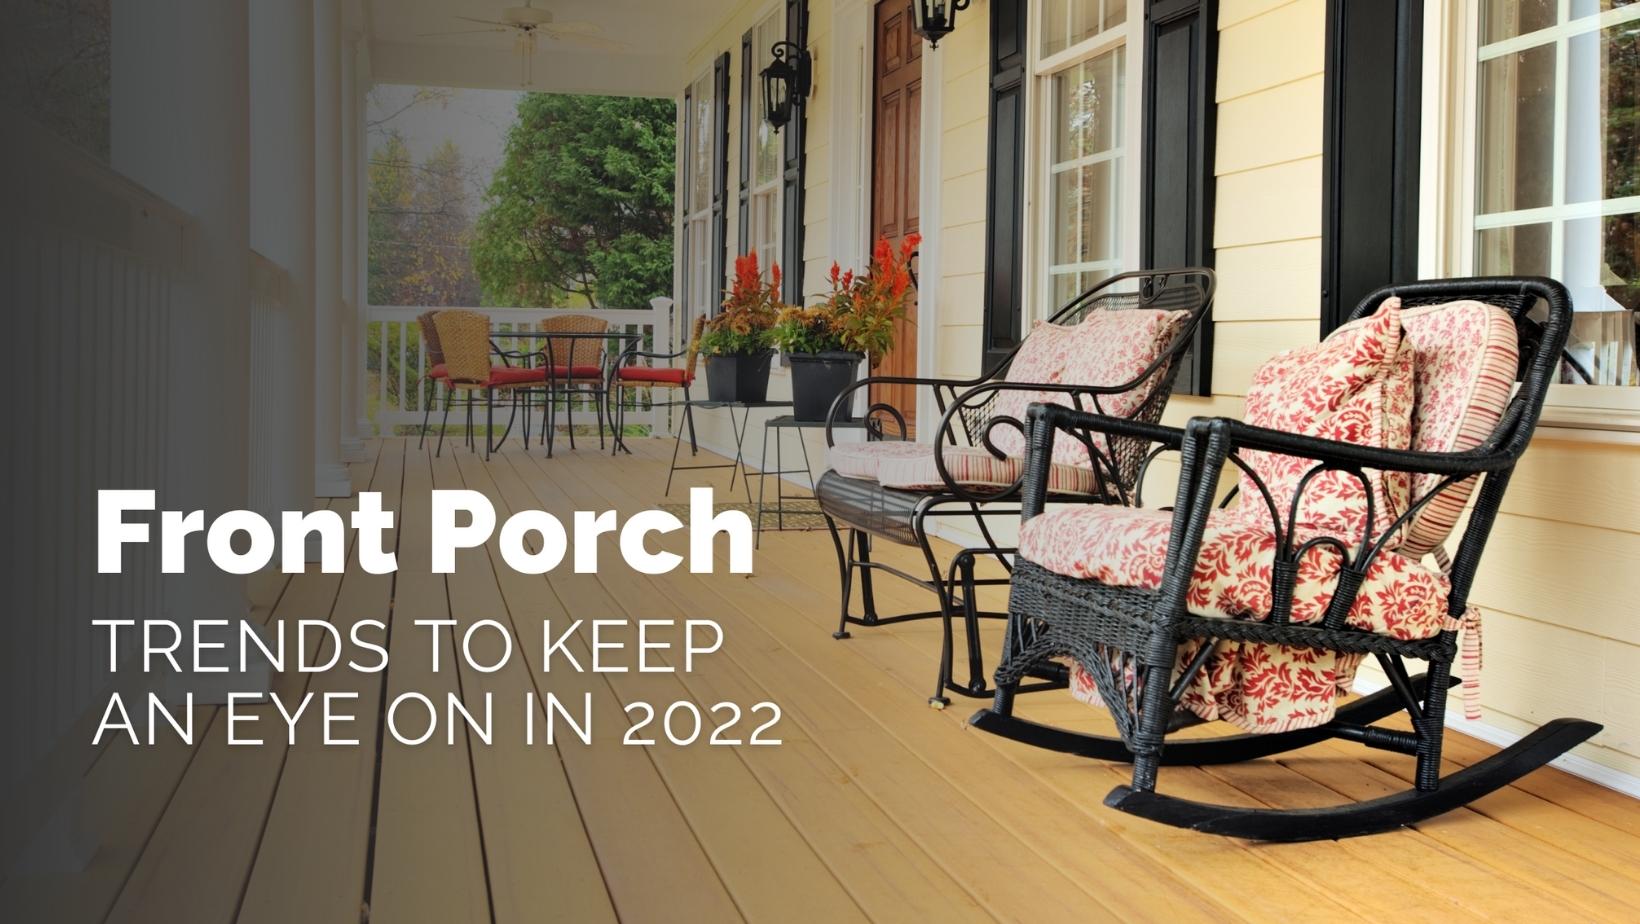 Front Porch trends to keep an eye on for the New Year